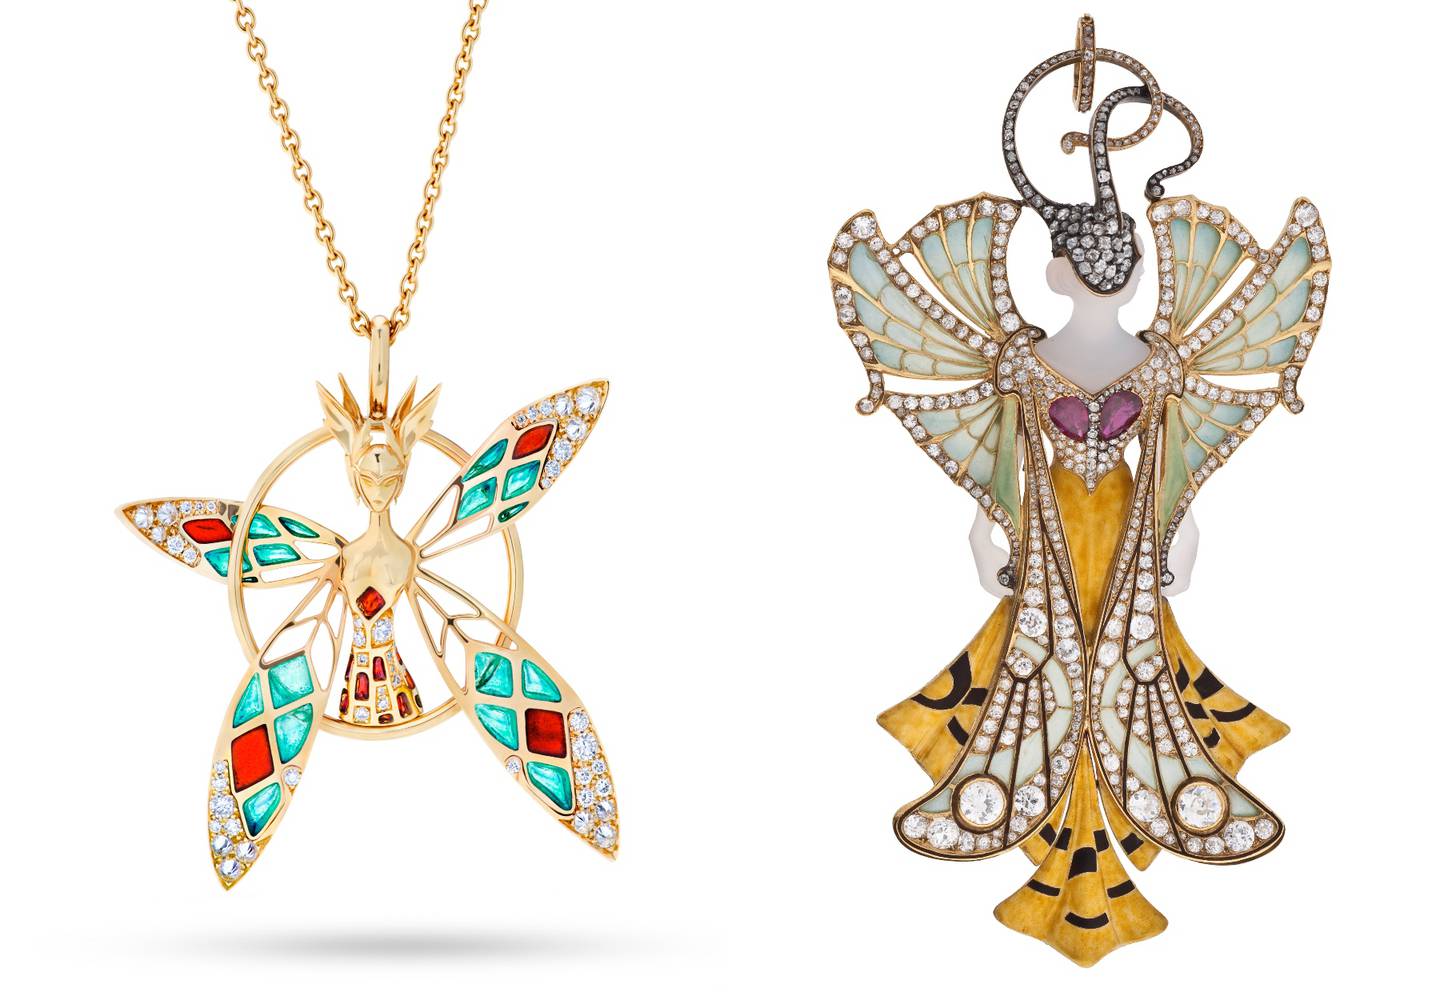 Left: A fairy pendant from Luximpact's first high jewellery collection for Vever brand. Vever. Right: An archival pendant by Vever in 1900. Museum des Arts Decoratifs de Paris.